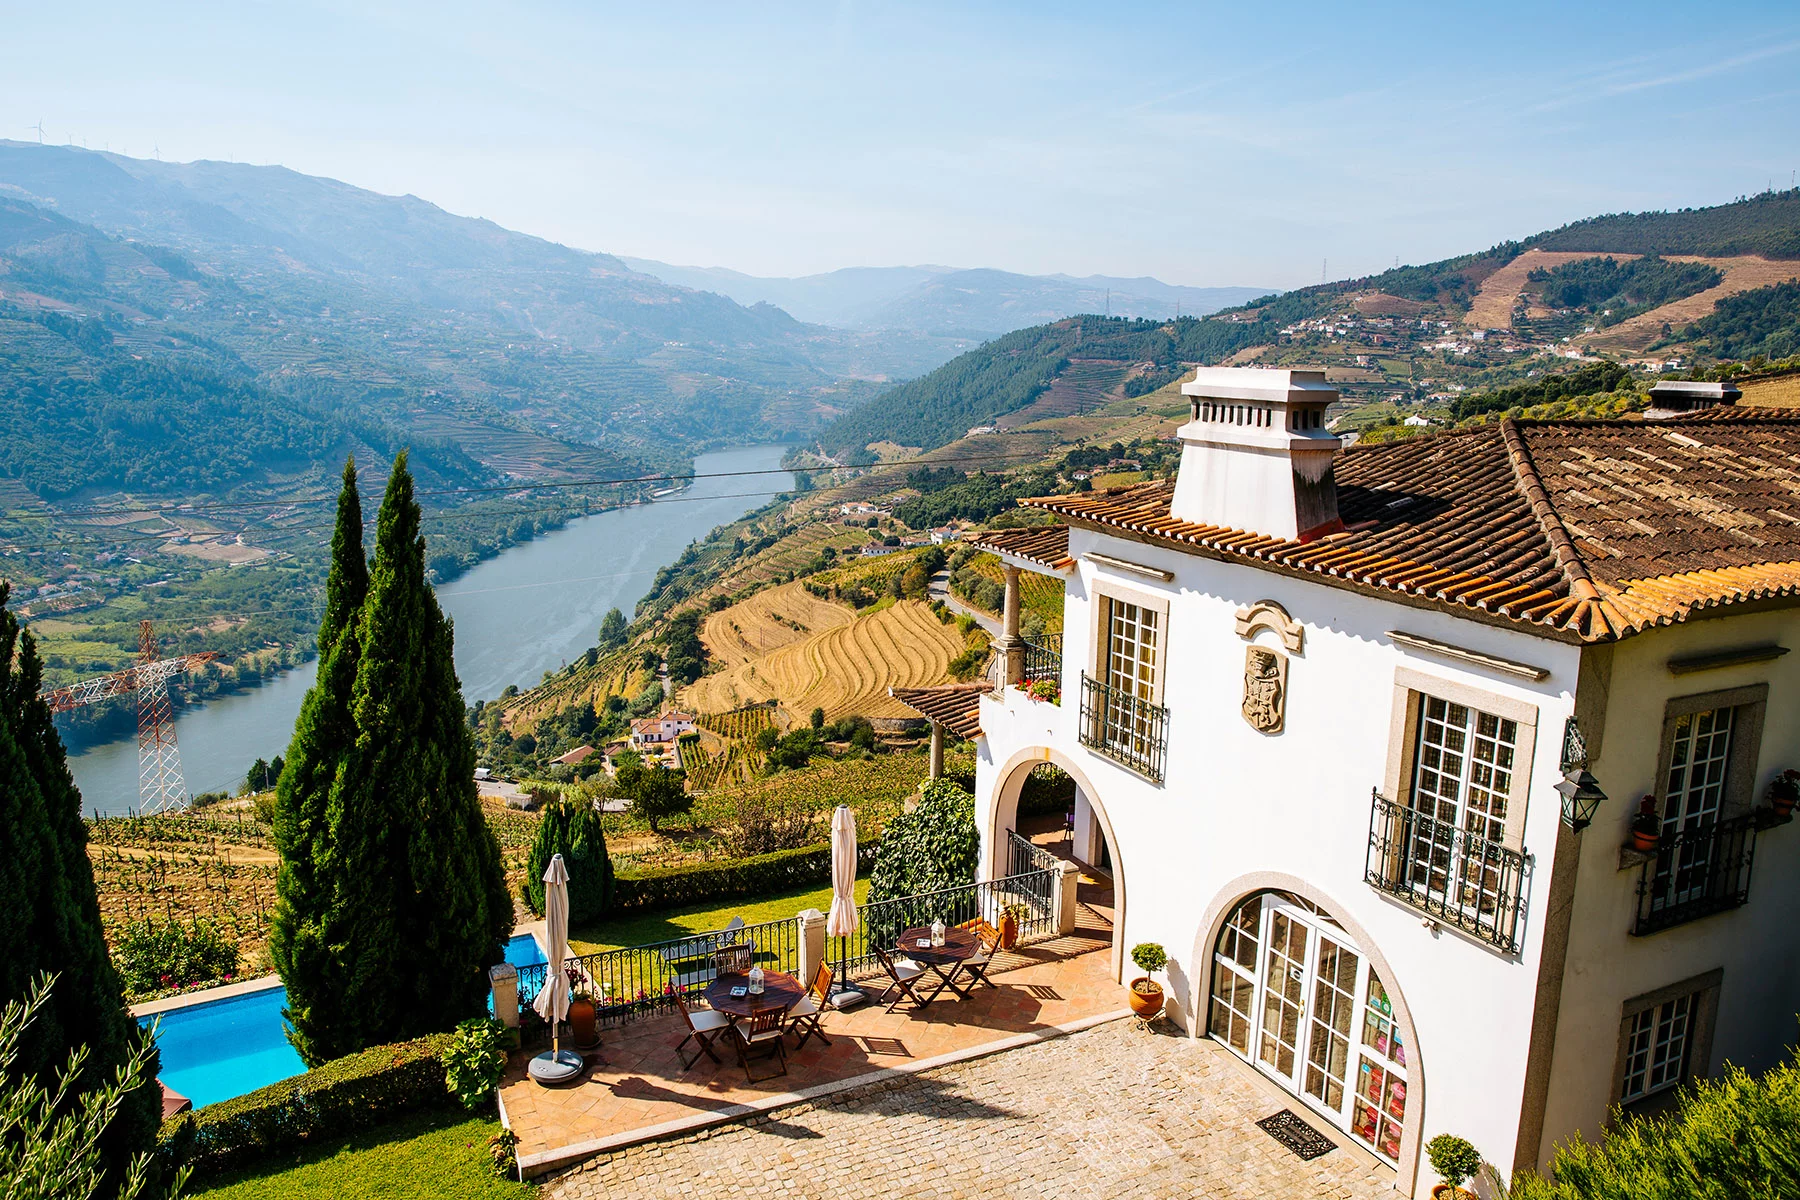 A home in the Douro Valley in Portugal